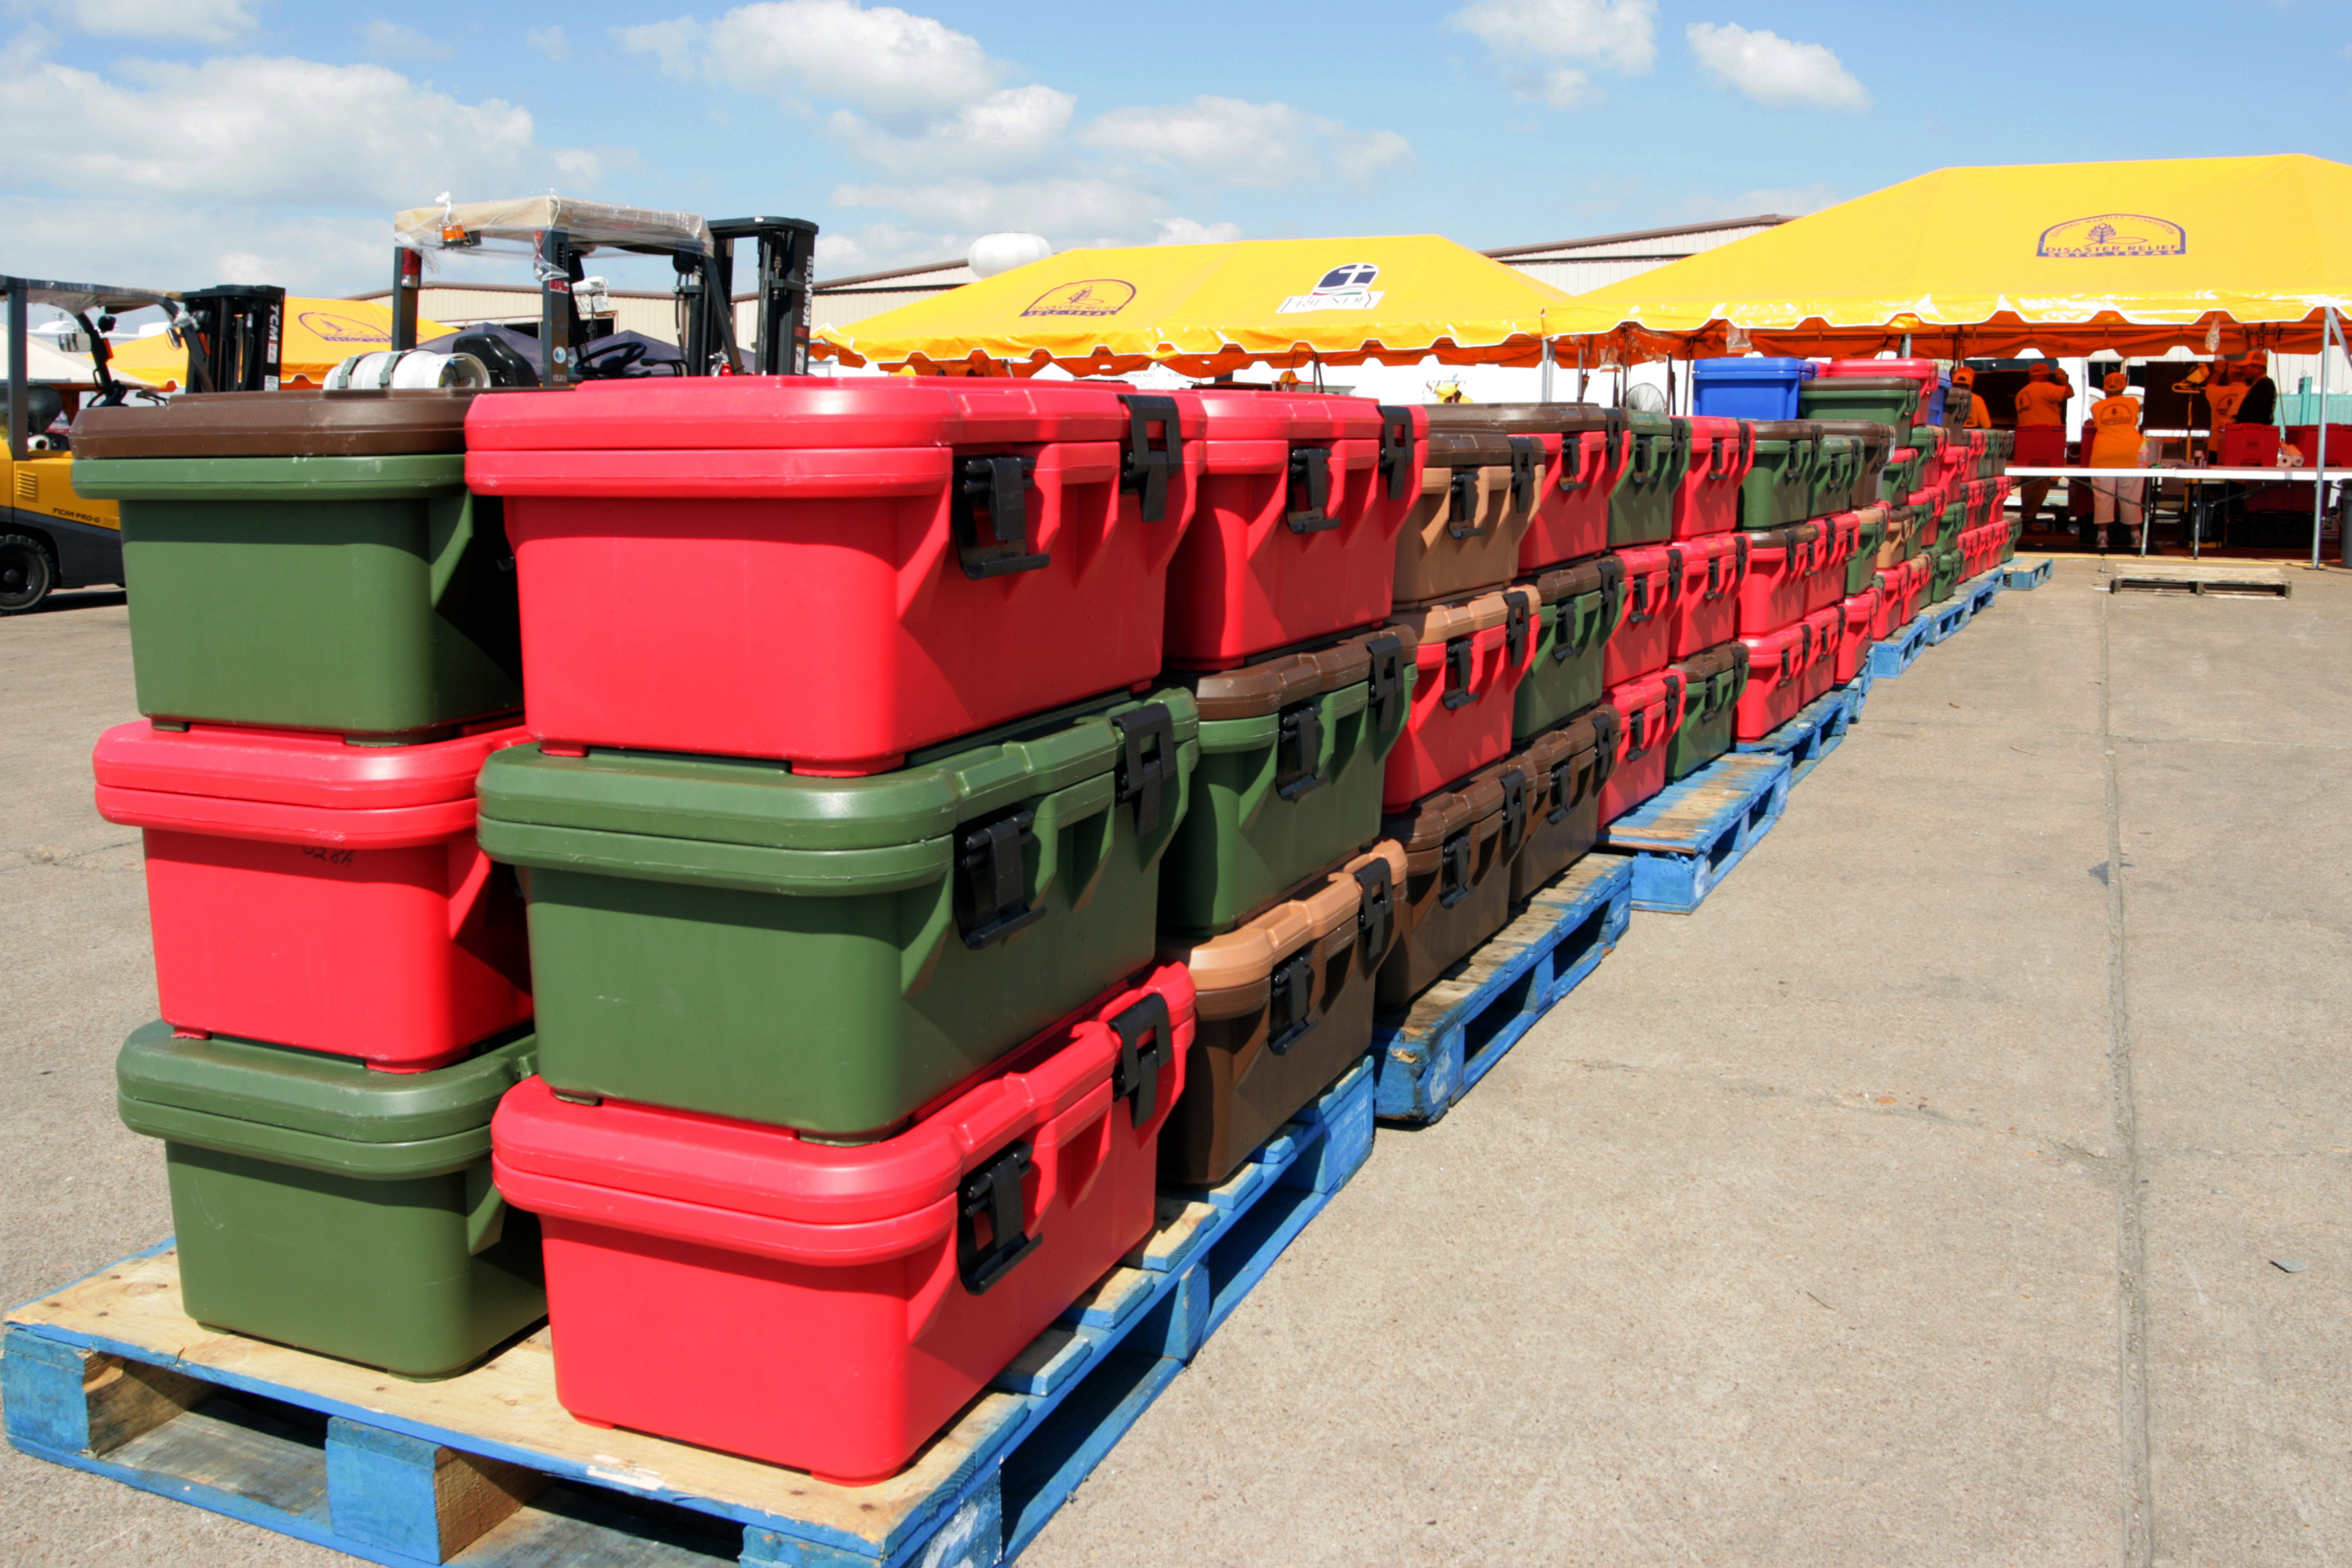 https://upload.wikimedia.org/wikipedia/commons/b/b4/FEMA_-_39207_-_Food_storage_containers_stacked_on_shipping_pallets_in_Texas.jpg